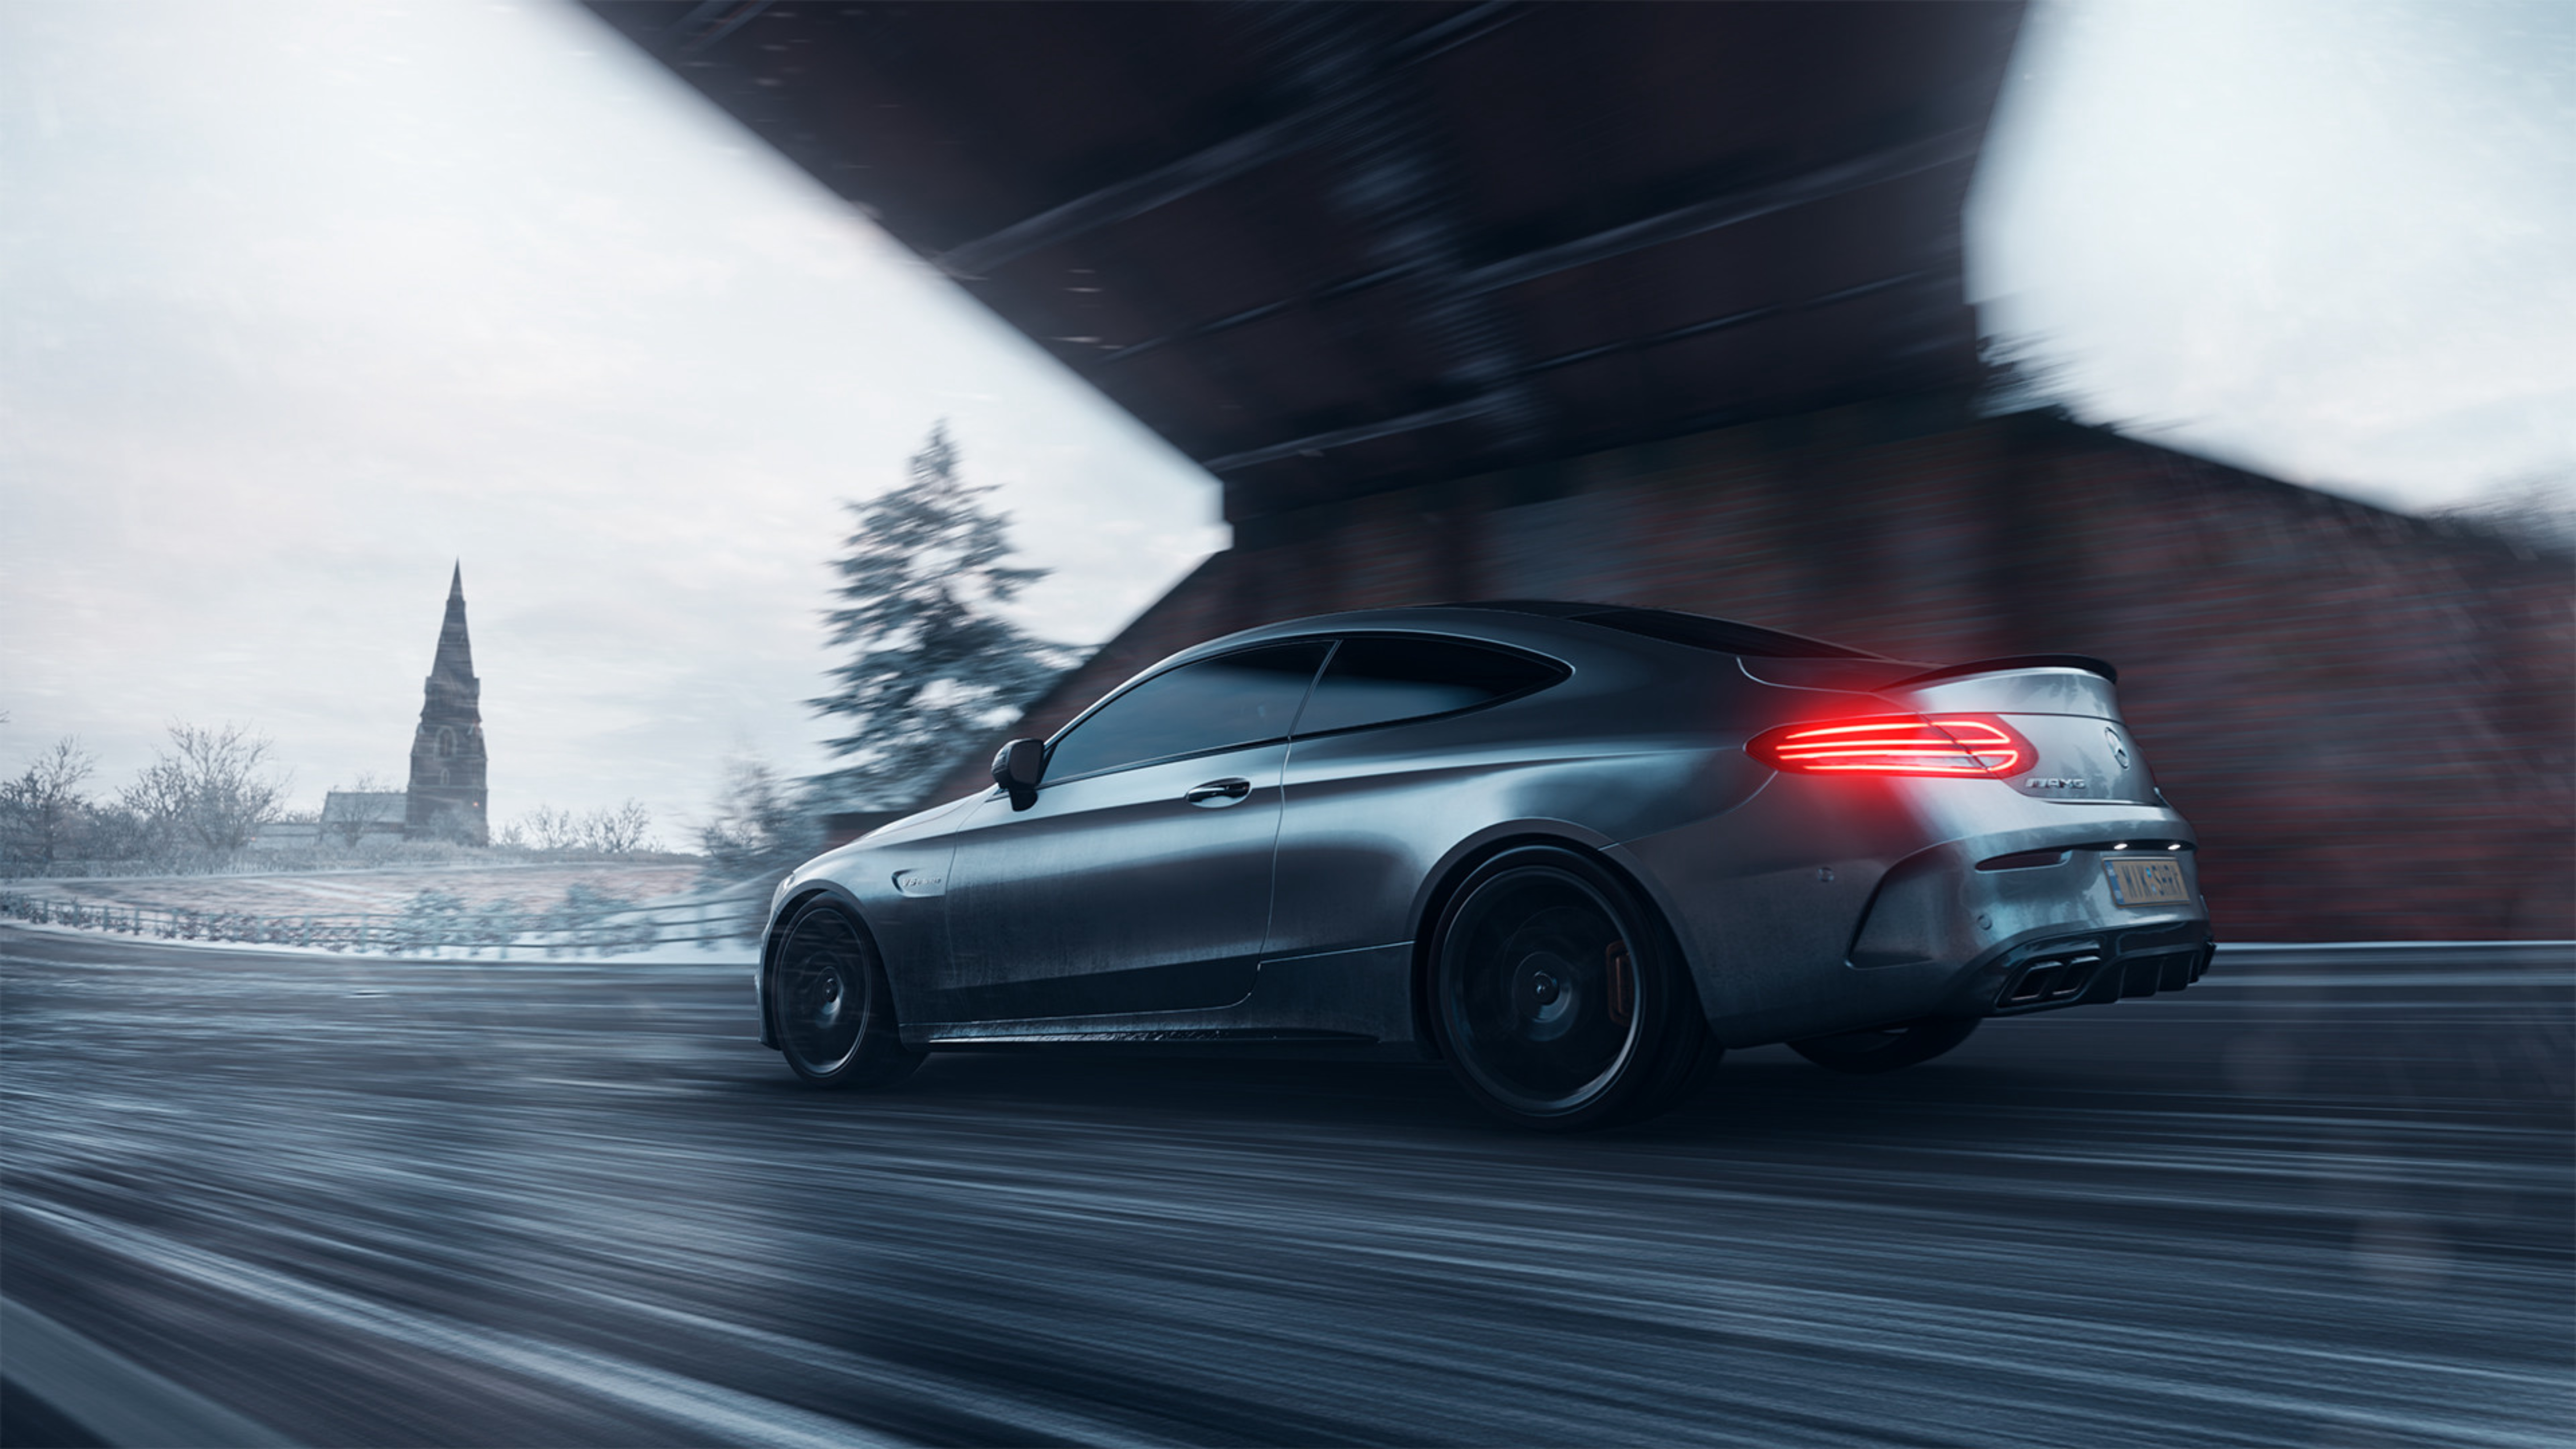 Phone Background Full HD speed, mercedes amg c63s, cars, side view